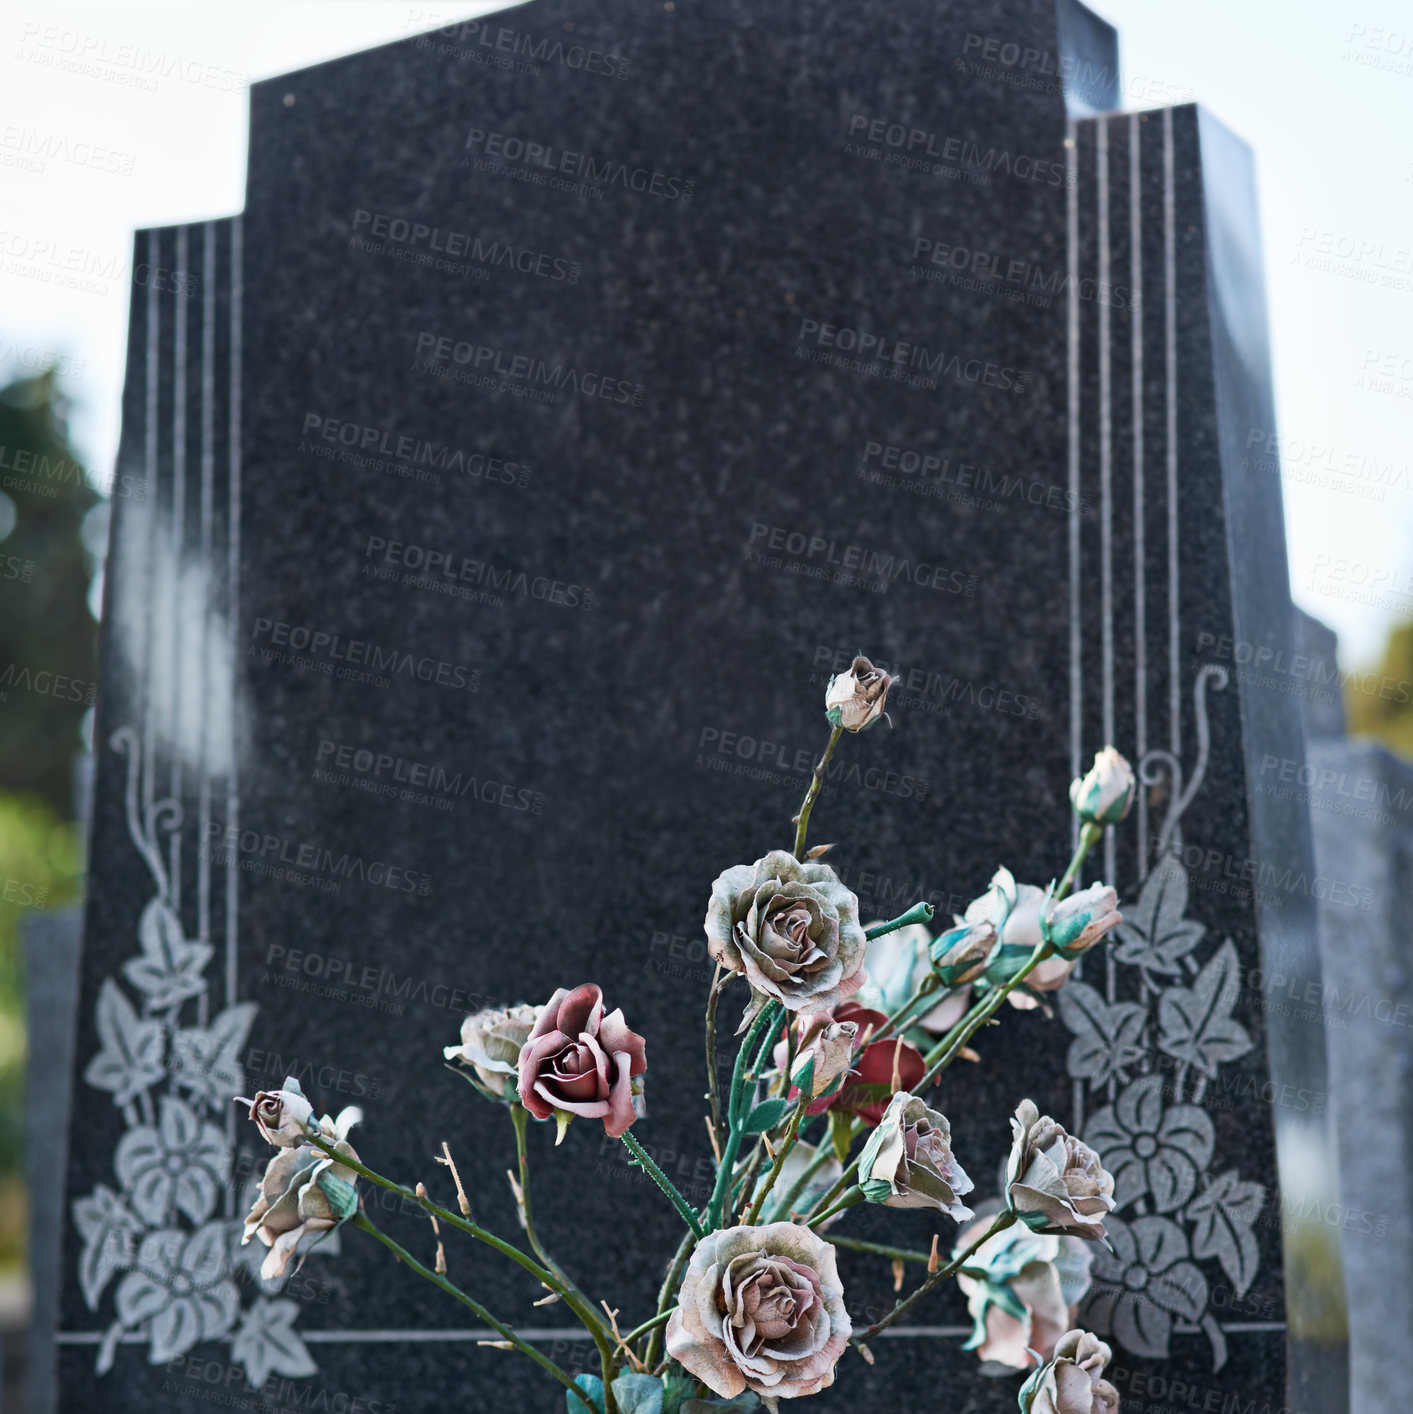 Buy stock photo Shot of a gravestone in a cemetery